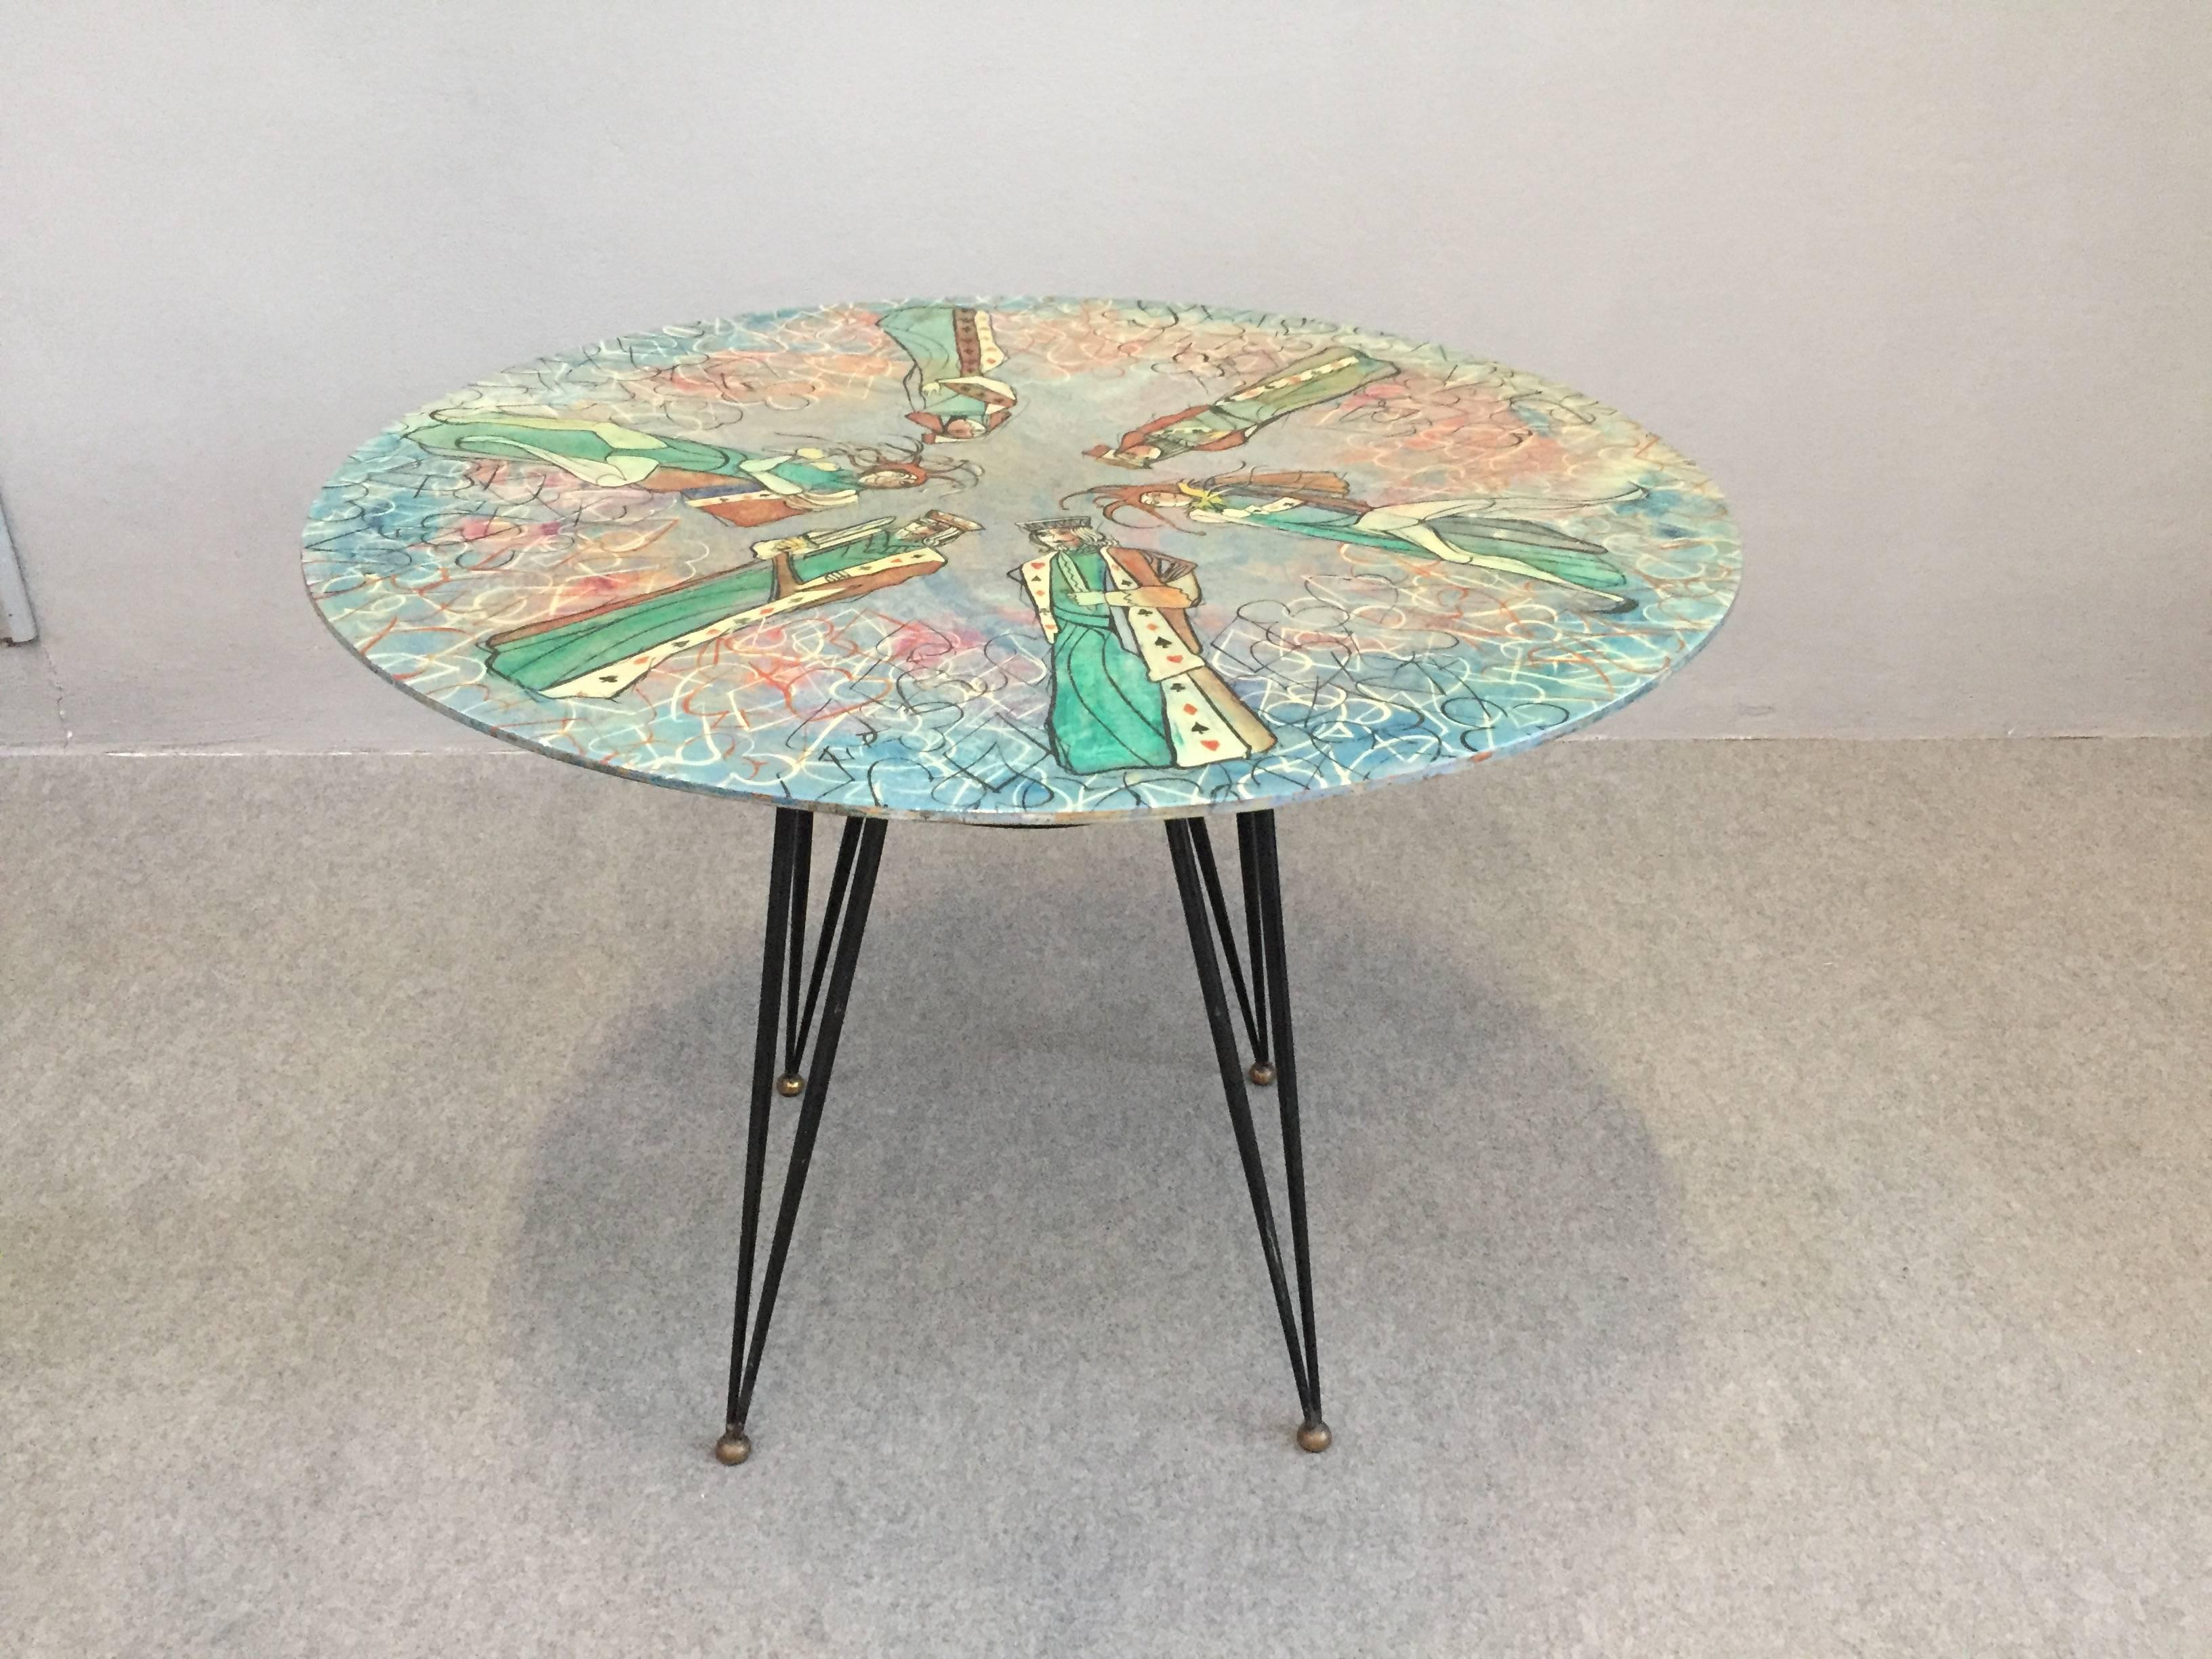 Very nice and rare table by Decalage, Torino, Italy.
Painted top with wonderful cards figures.
Label under the top.